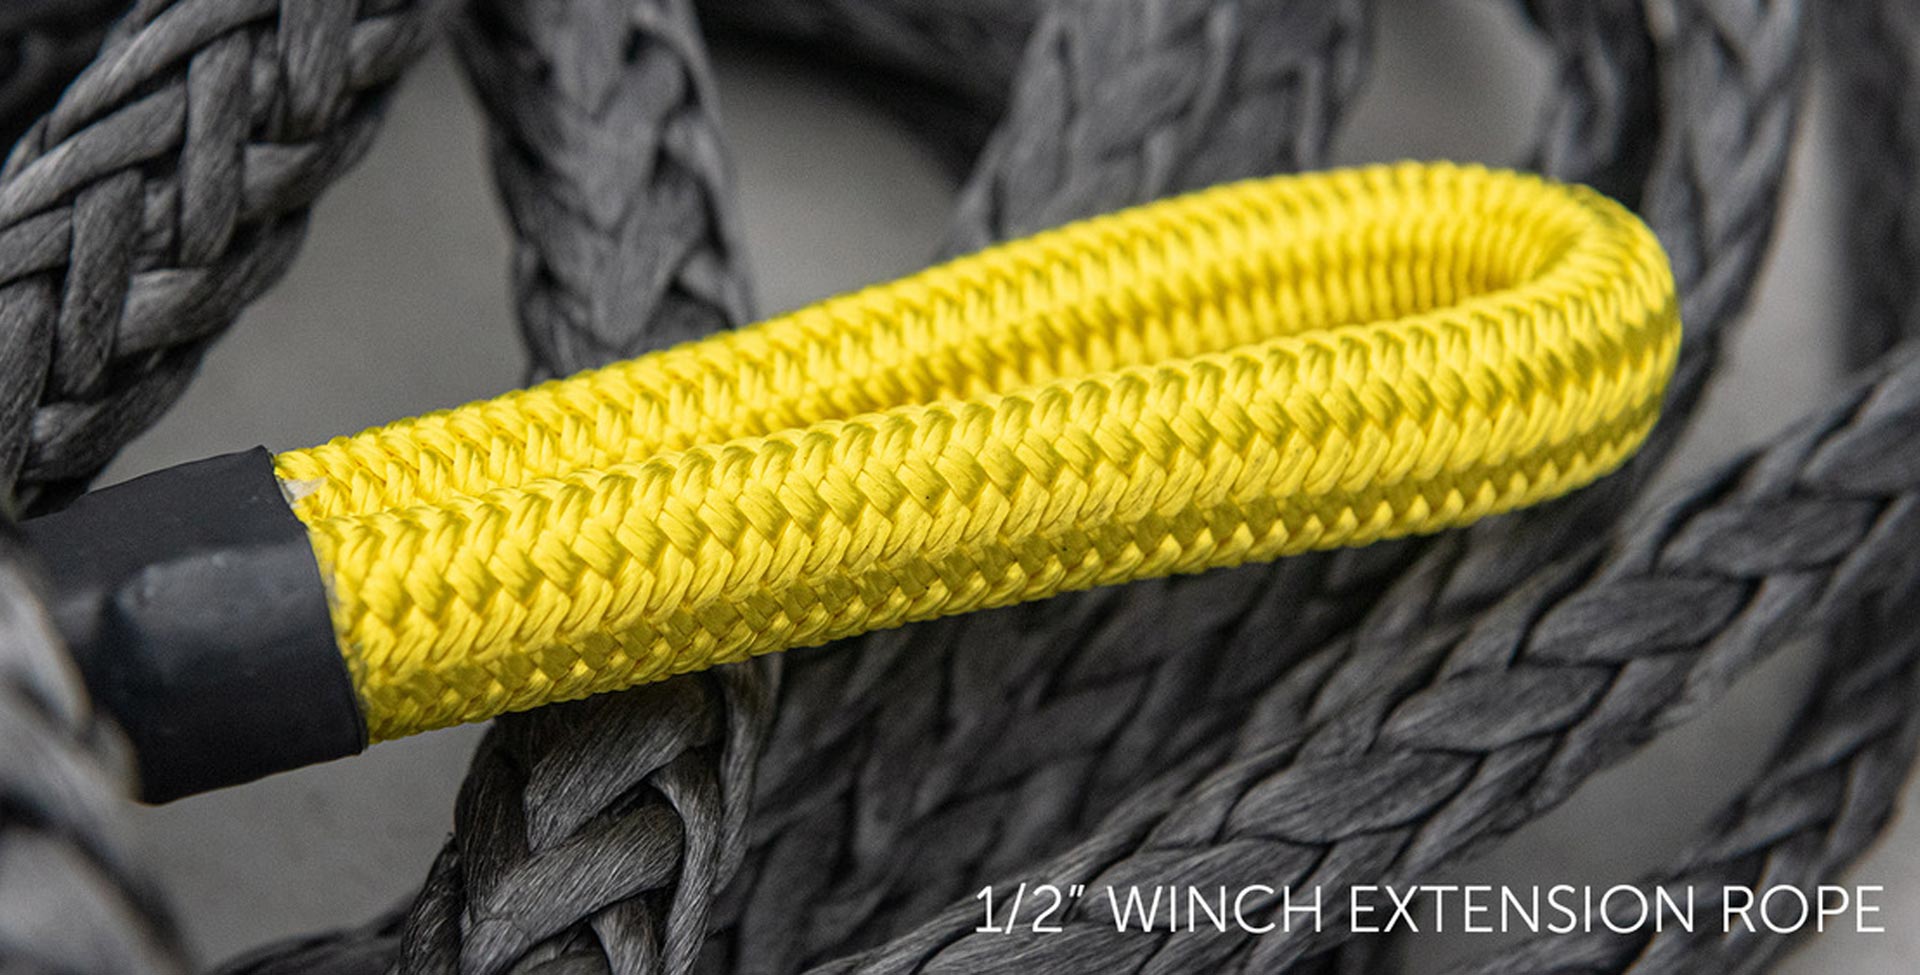 Winch Extension Ropes